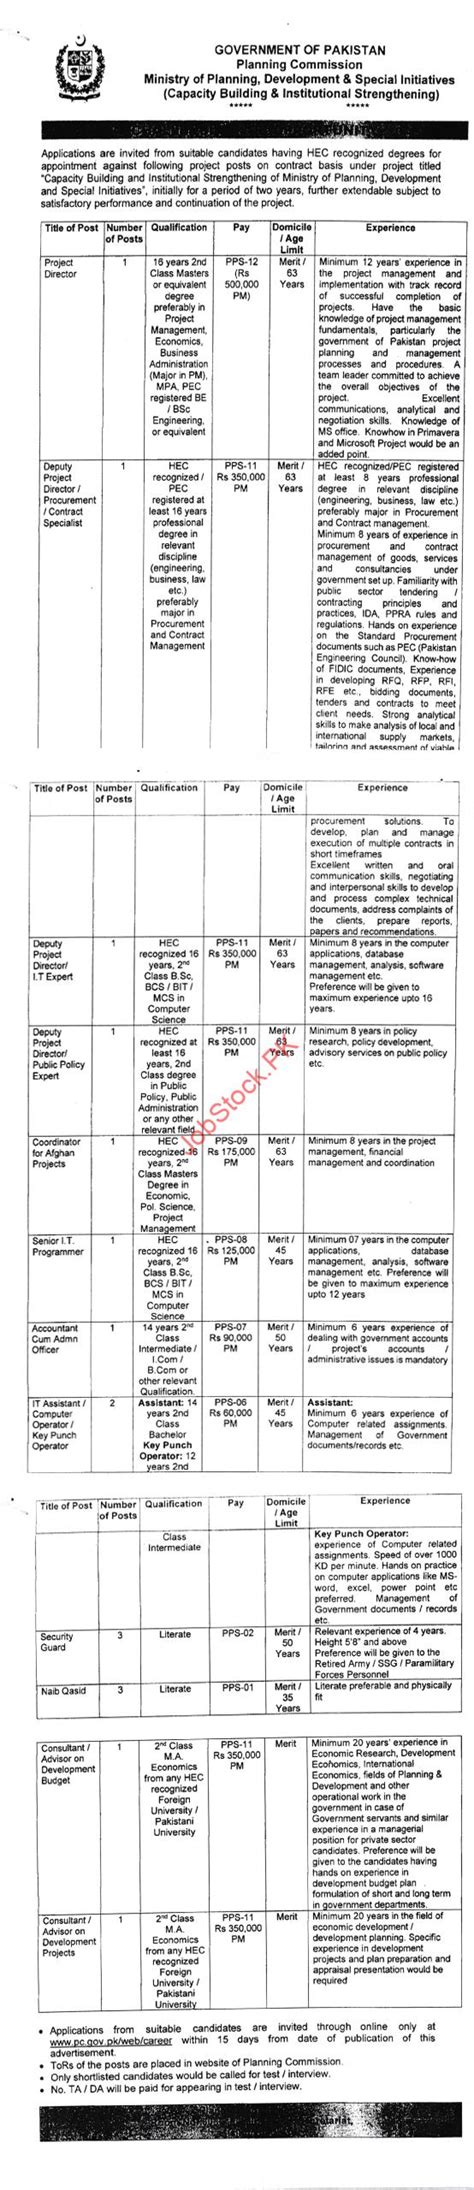 Ministry Of Planning Development And Special Initiatives Jobs 2021 Pc